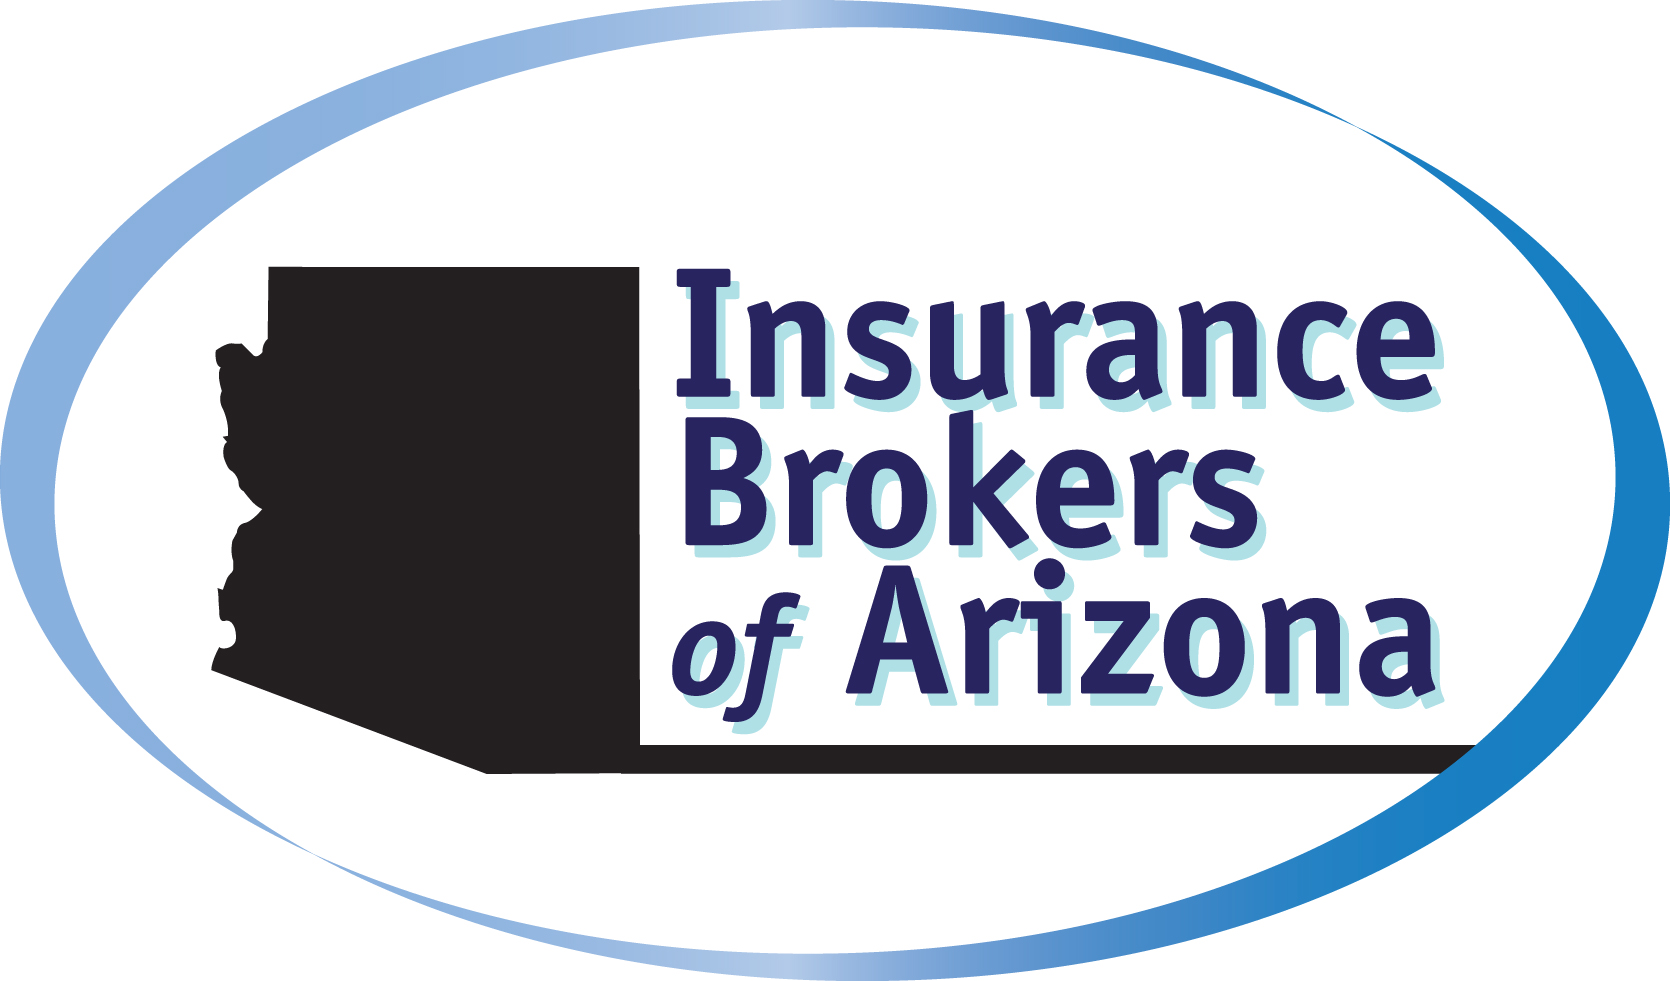 Insurance Brokers of Arizona - Our Groups